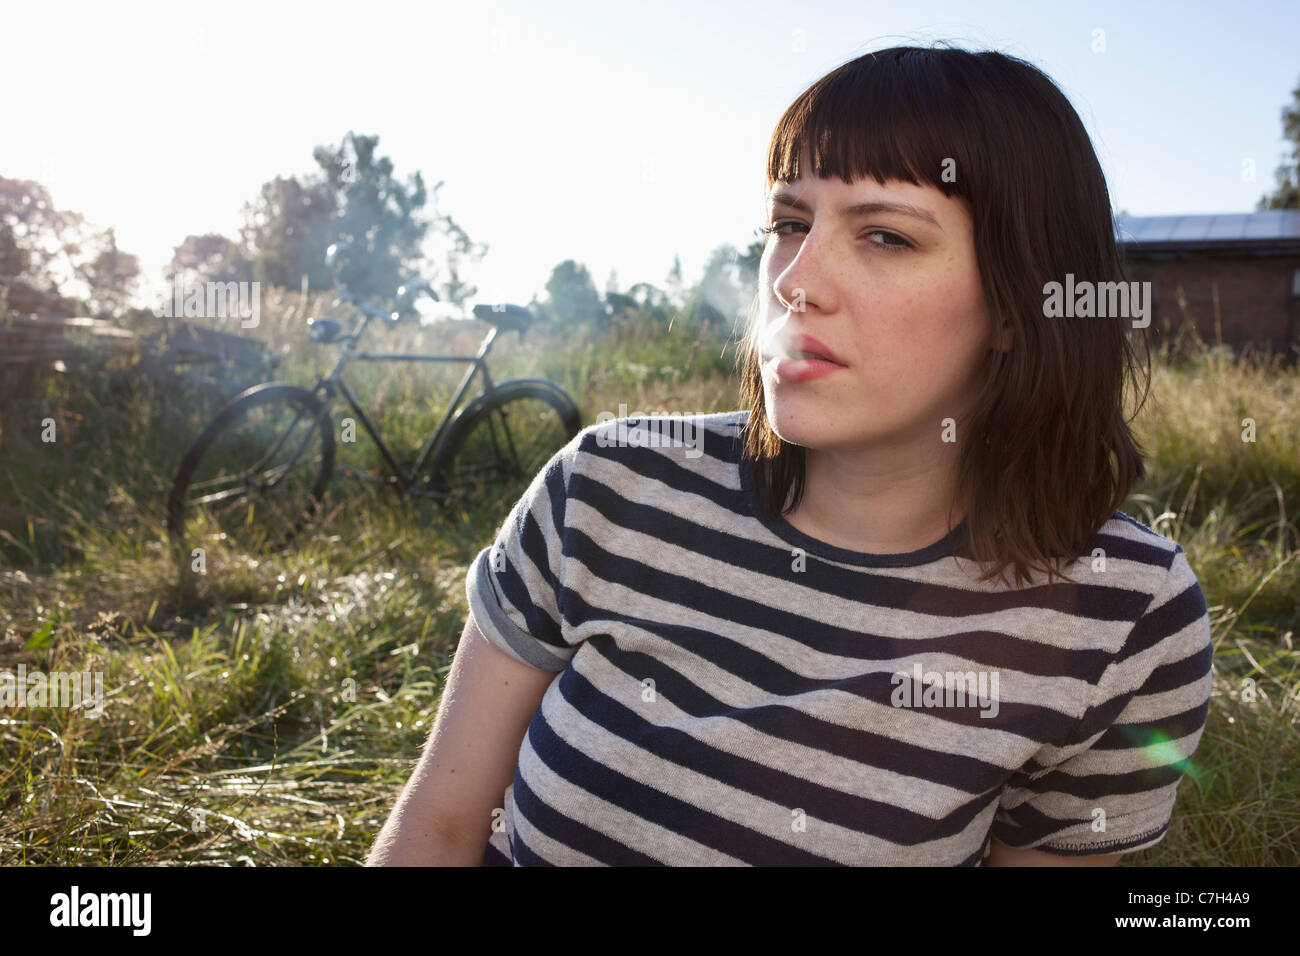 Girl sitting in secluded field exhaling smoke Stock Photo